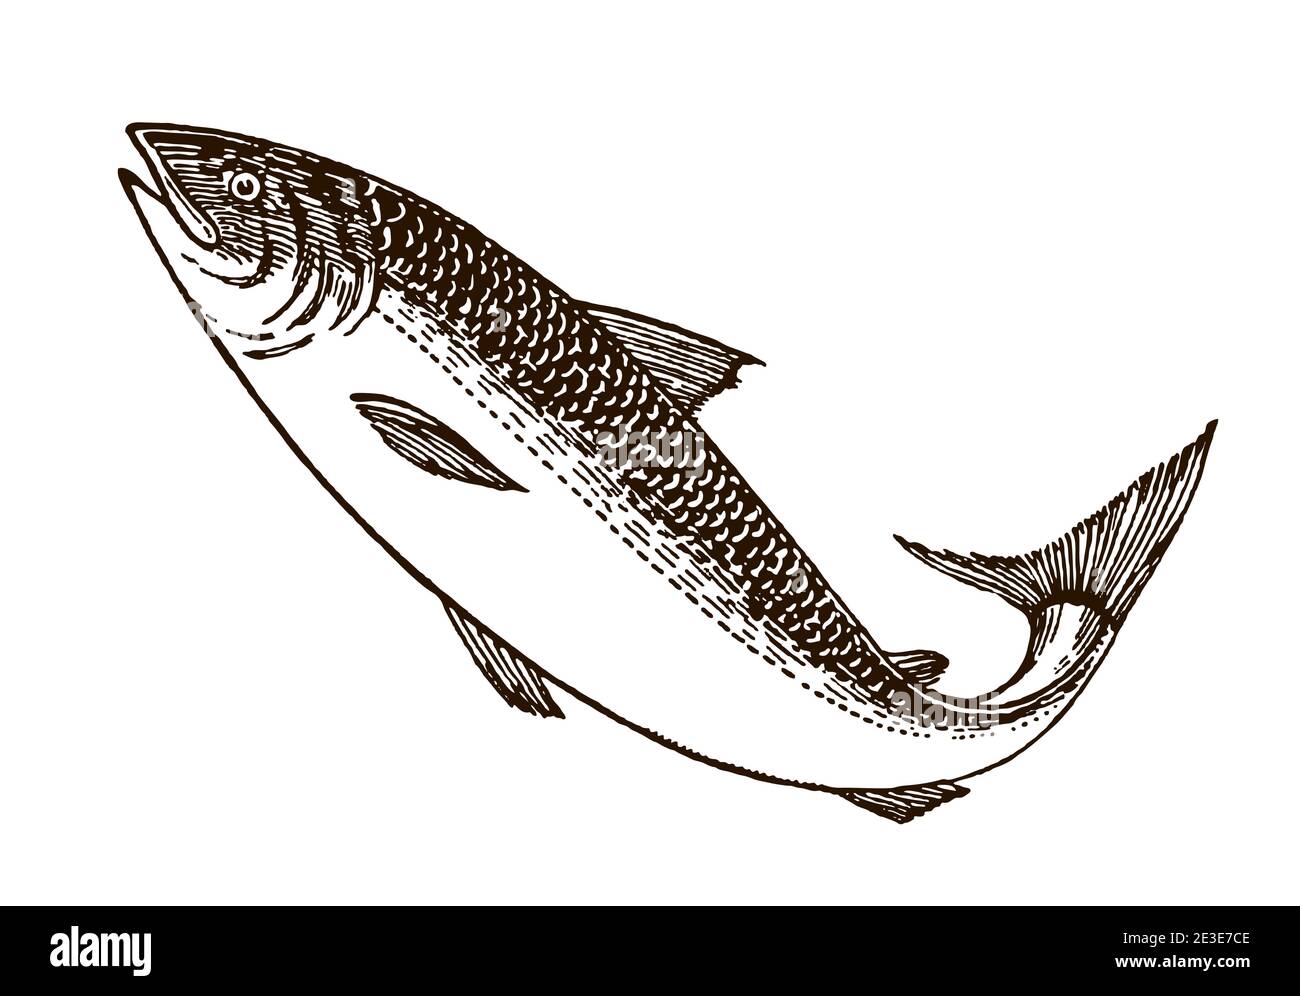 Jumping salmon in side view. Illustration after an antique drawing from the early 20th century Stock Vector